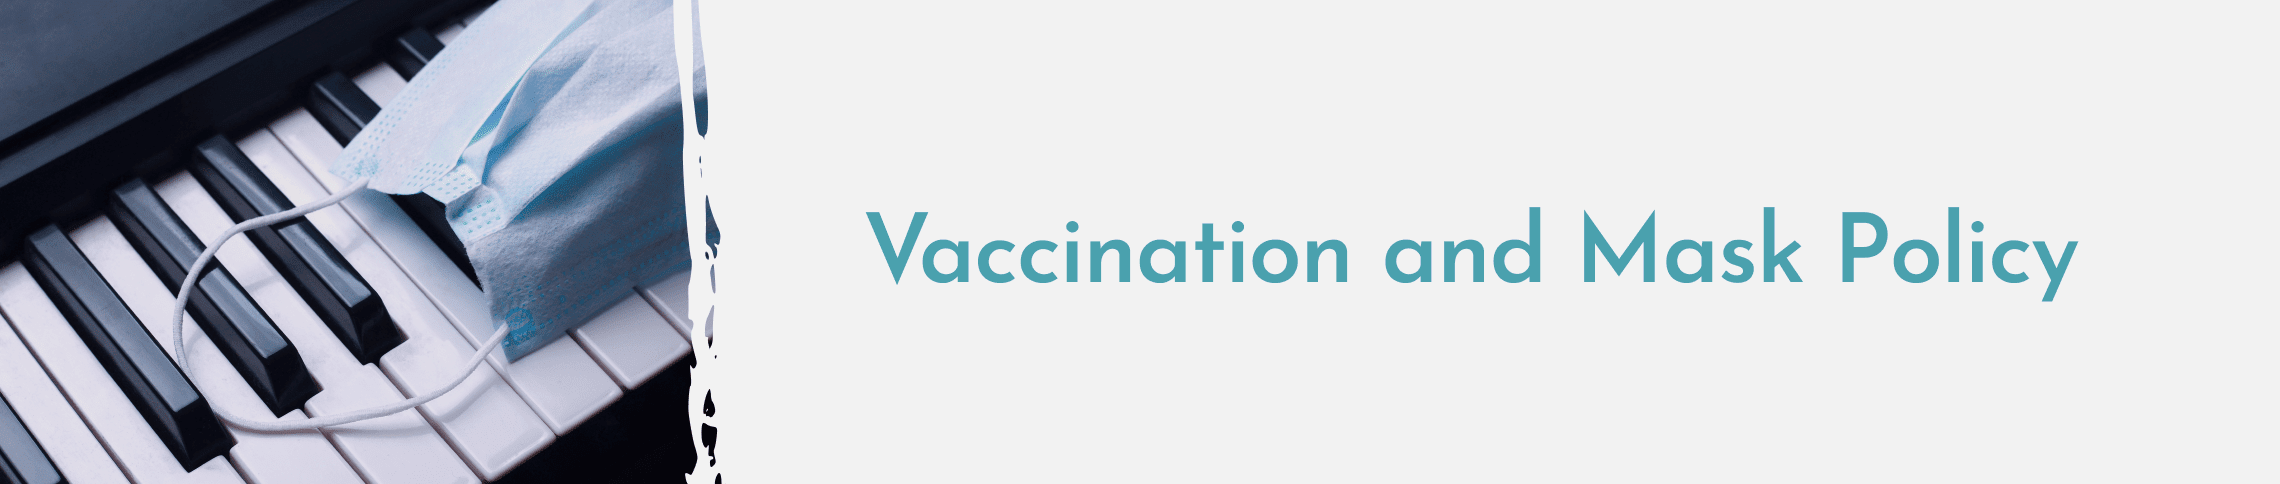 Vaccination and Mask Policy banner